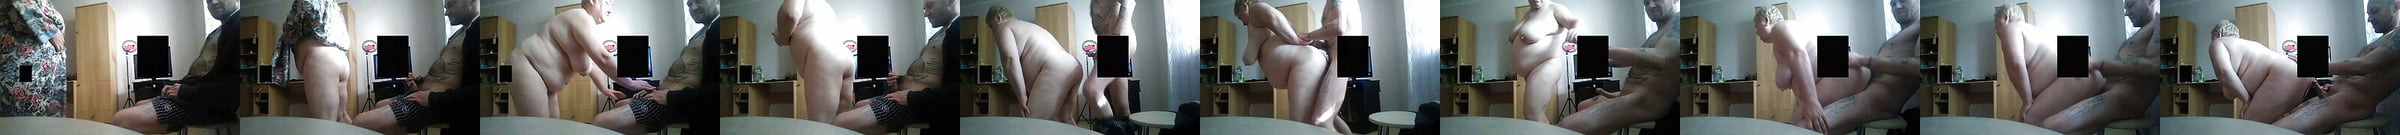 Cuck Films His Wife Getting Eaten Out She Loves It Porn Ea Xhamster